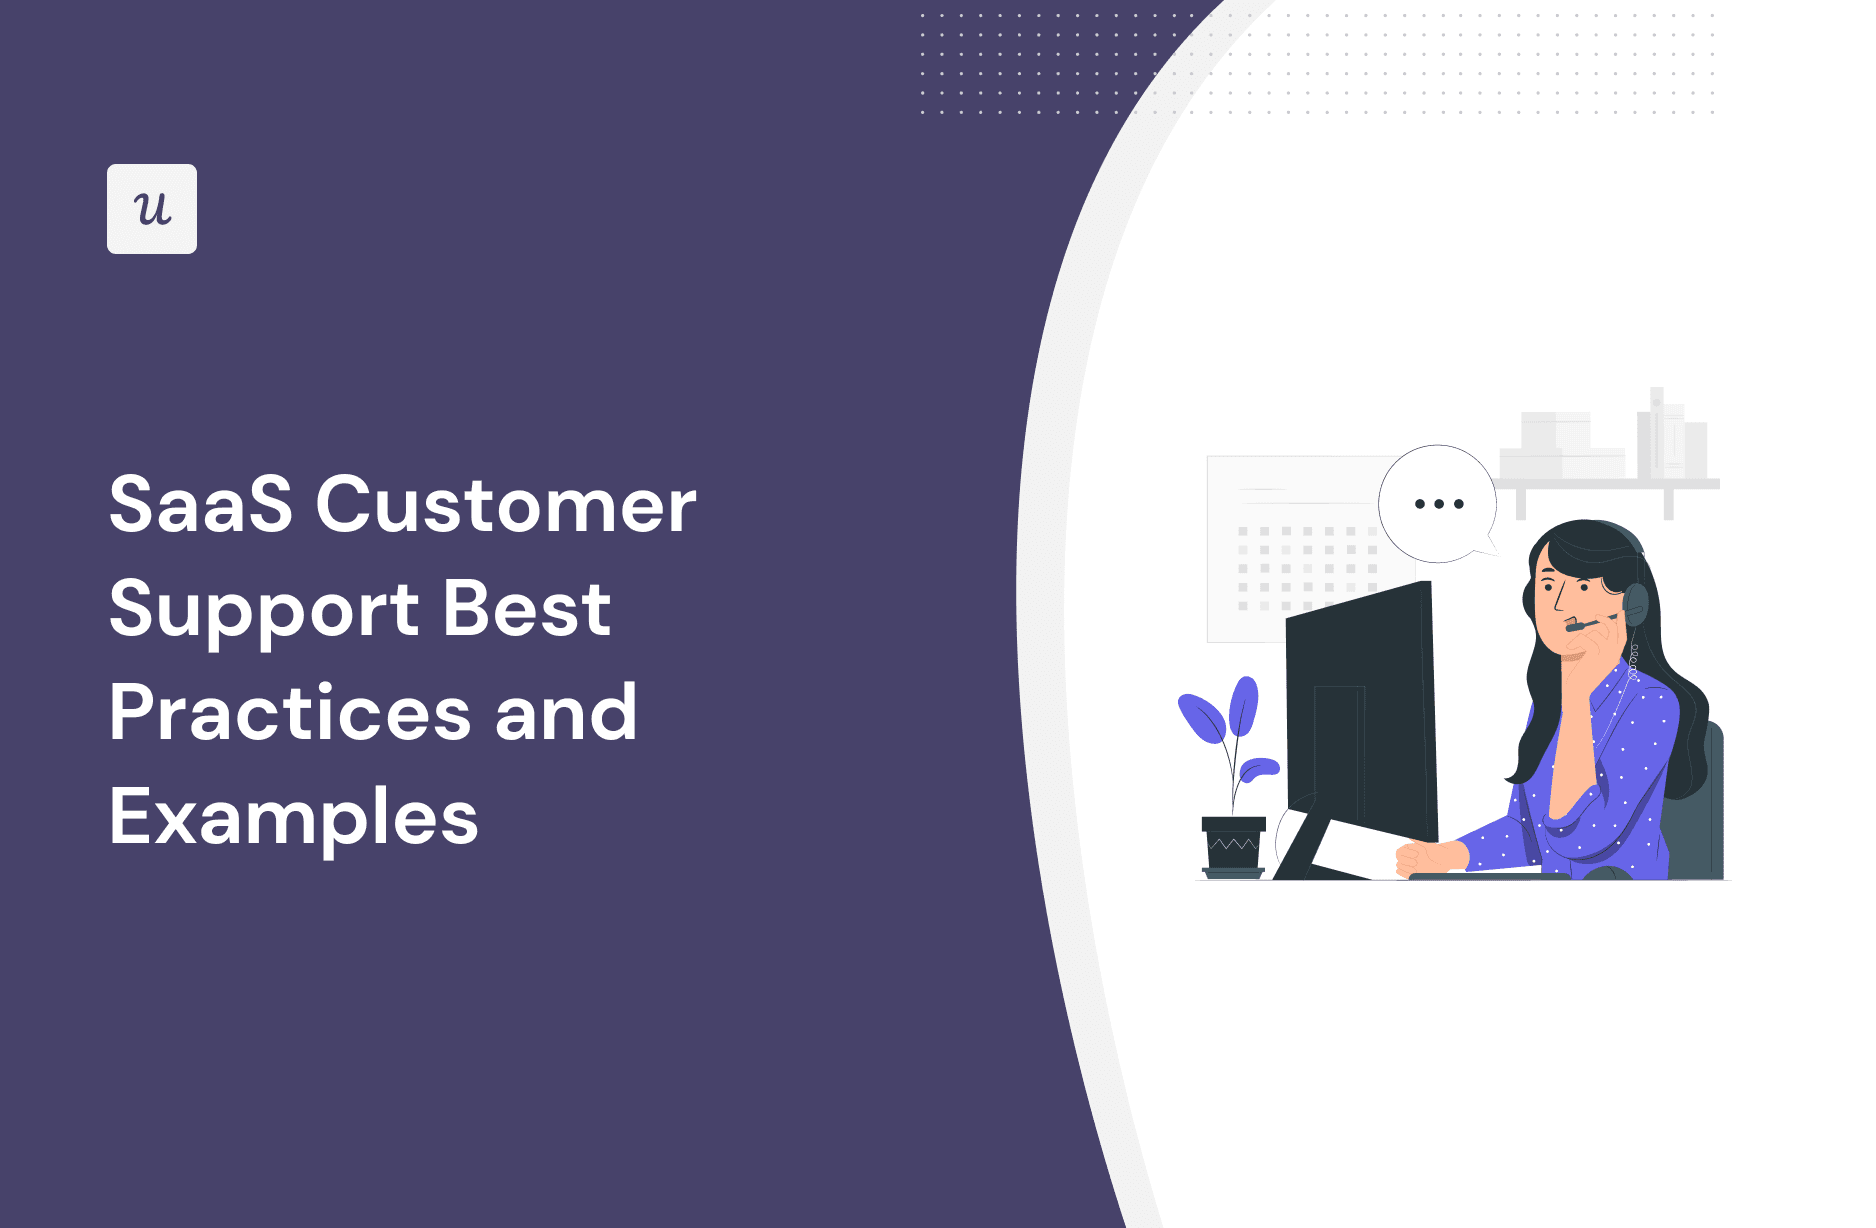 SaaS Customer Support Best Practices and Examples cover